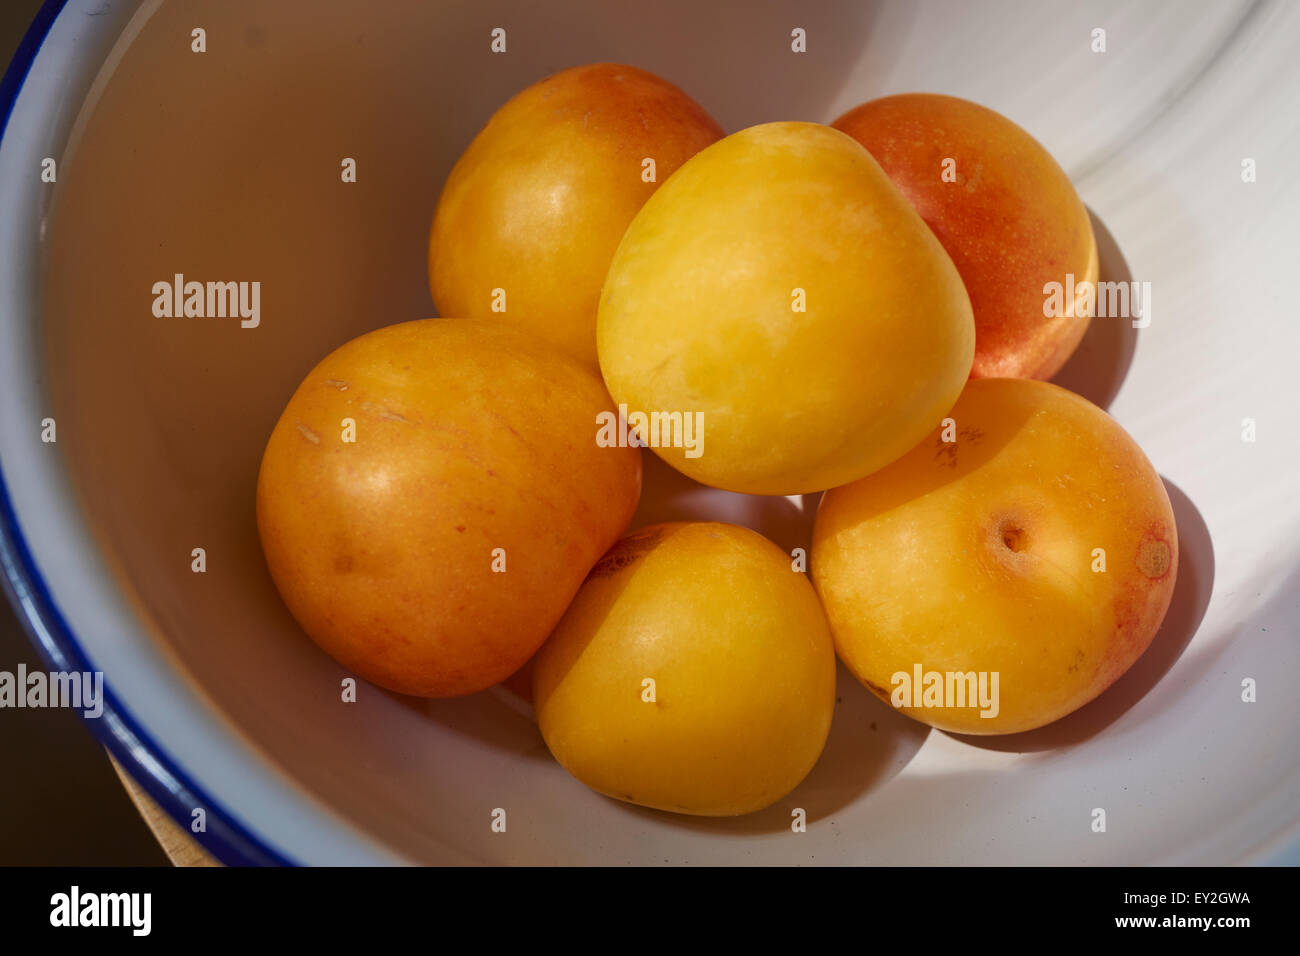 A bowl of yellow plums Stock Photo